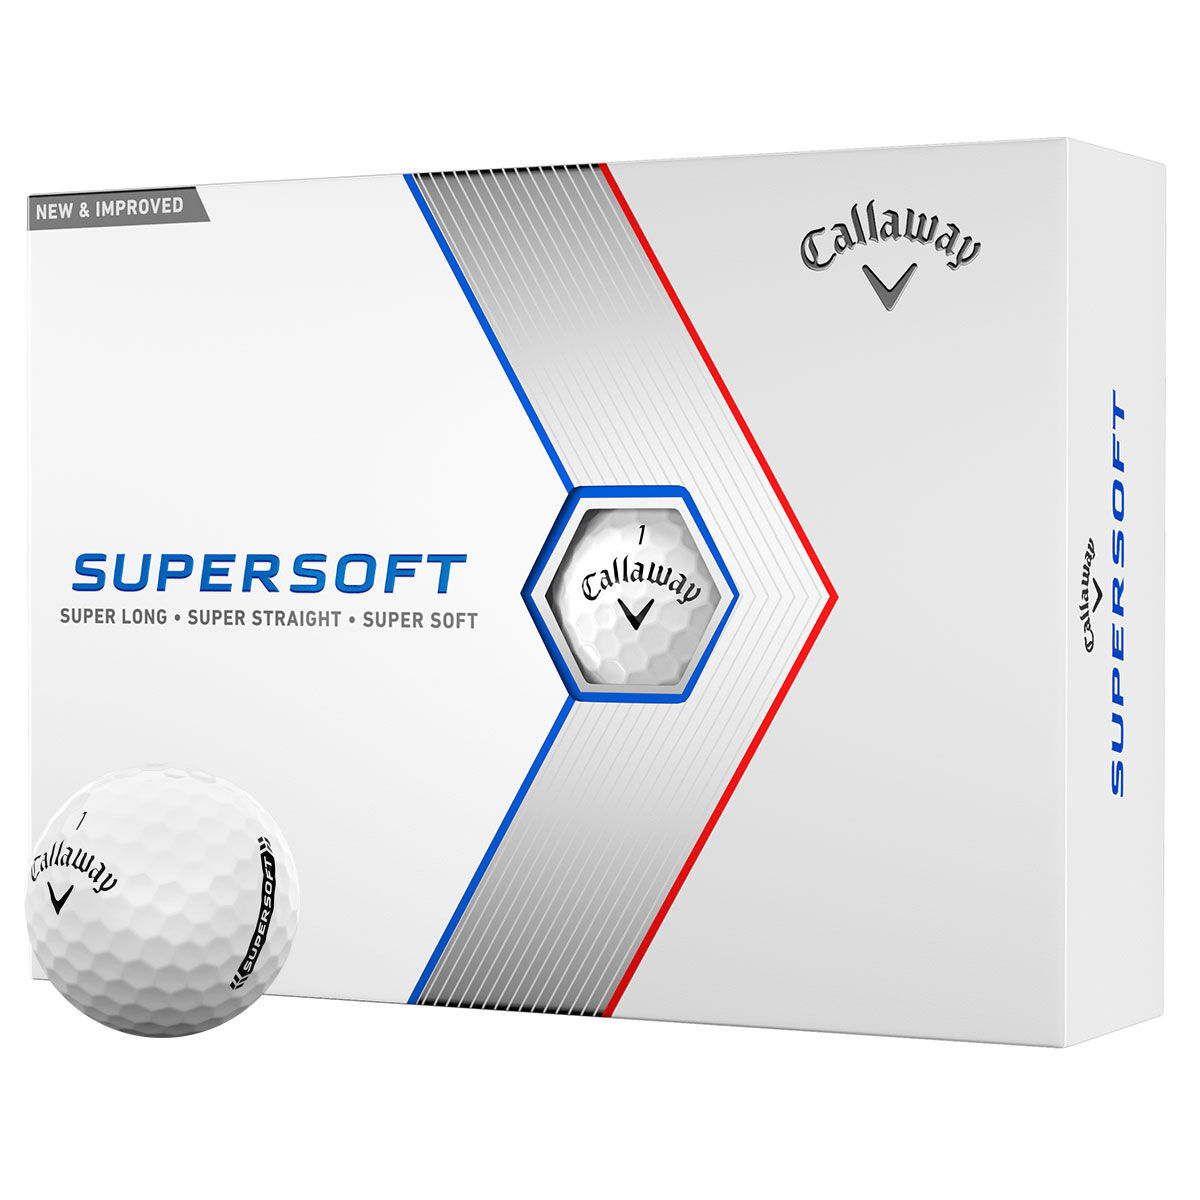 Callaway Golf White Supersoft 12 Golf Ball Pack | American Golf, One Size - Father's Day Gift von Callaway Golf